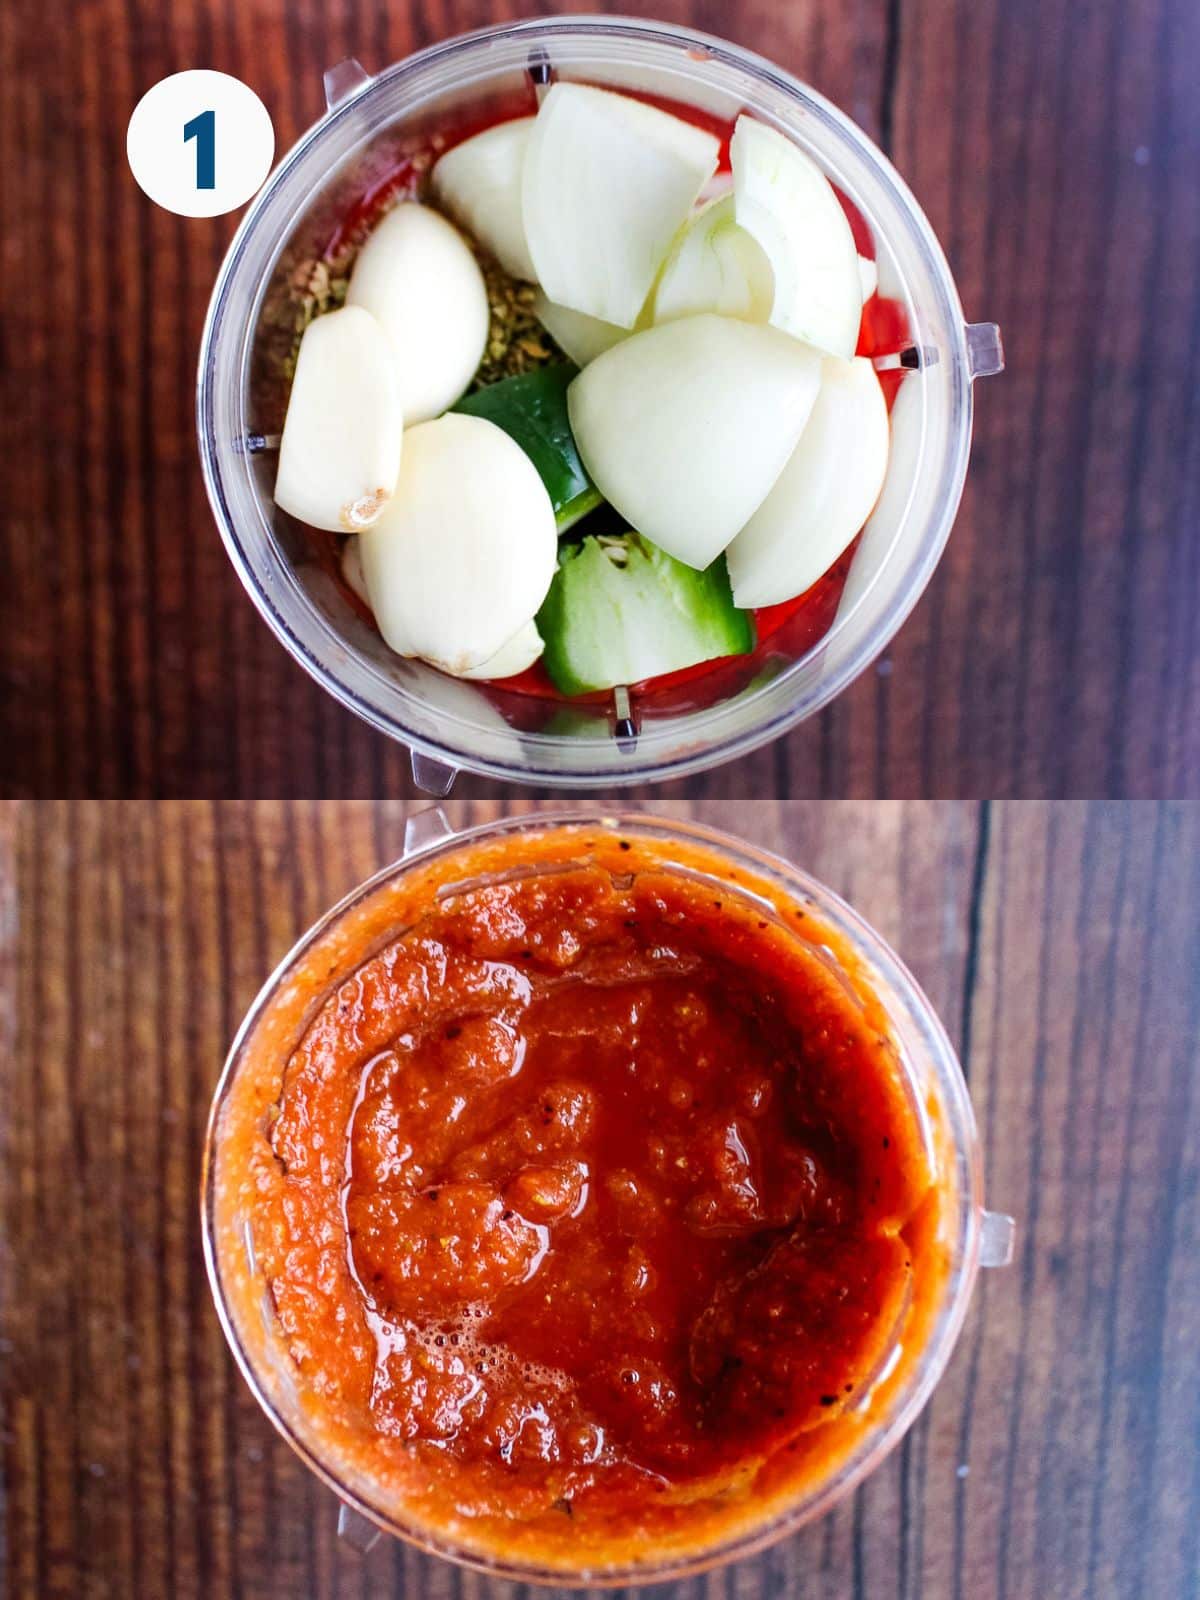 A collage of images showing vegetables in blender and then after blending into salsa.